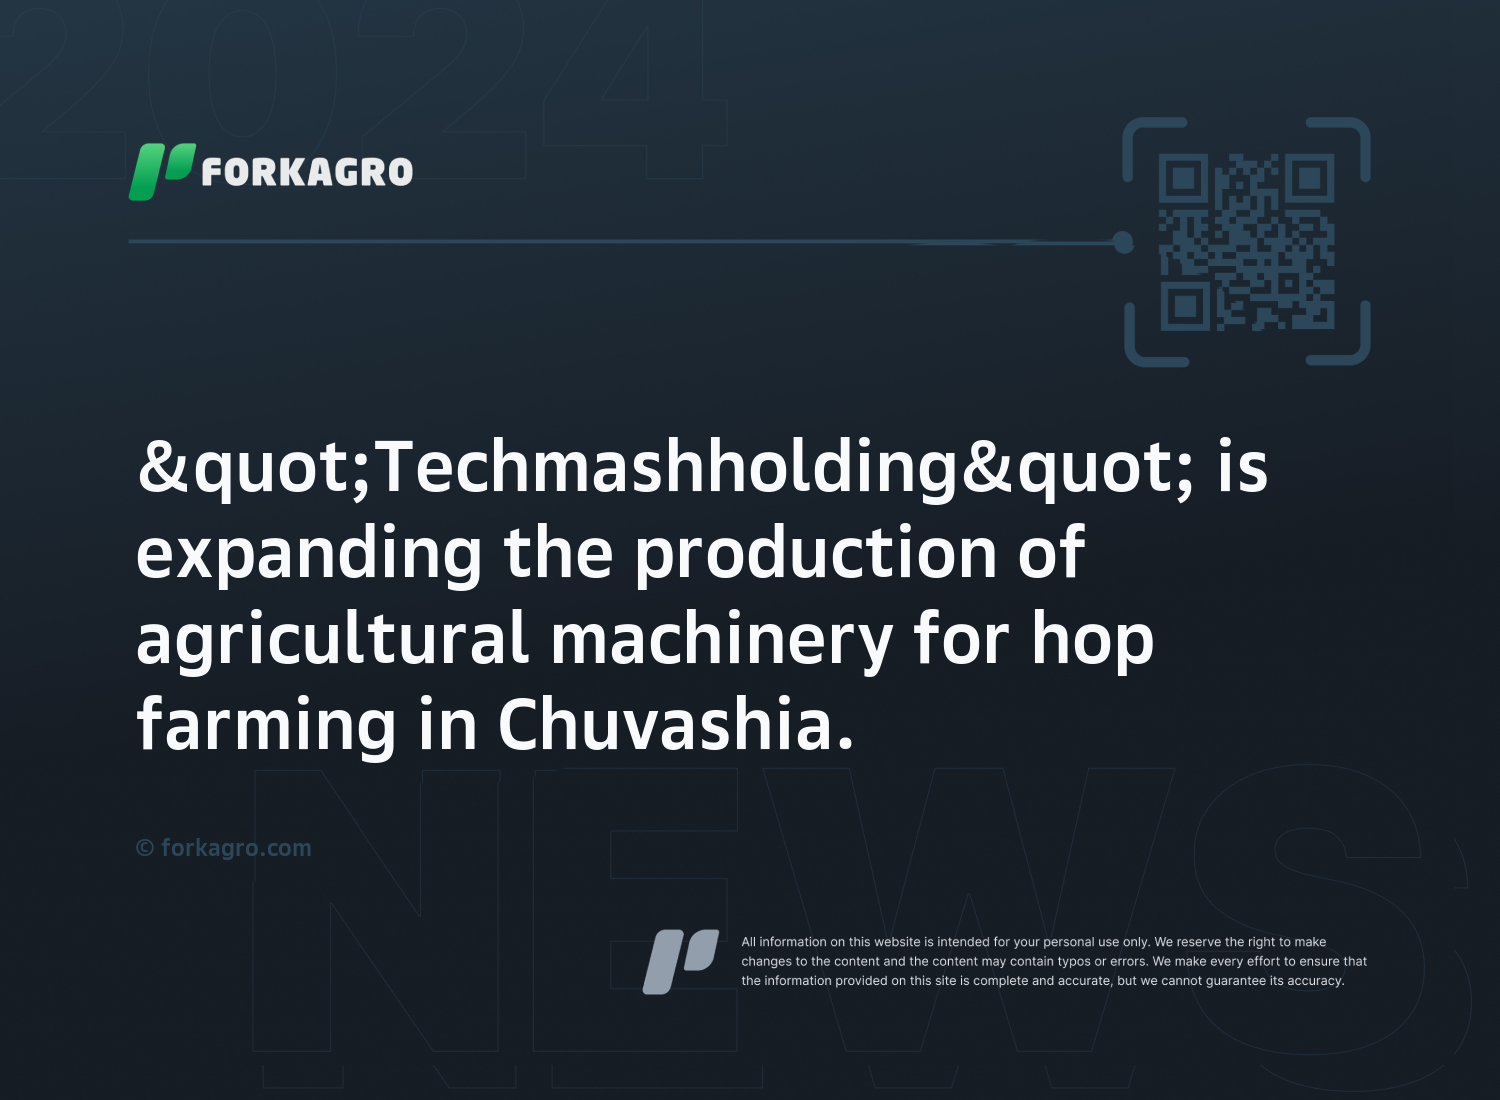 "Techmashholding" is expanding the production of agricultural machinery for hop farming in Chuvashia.